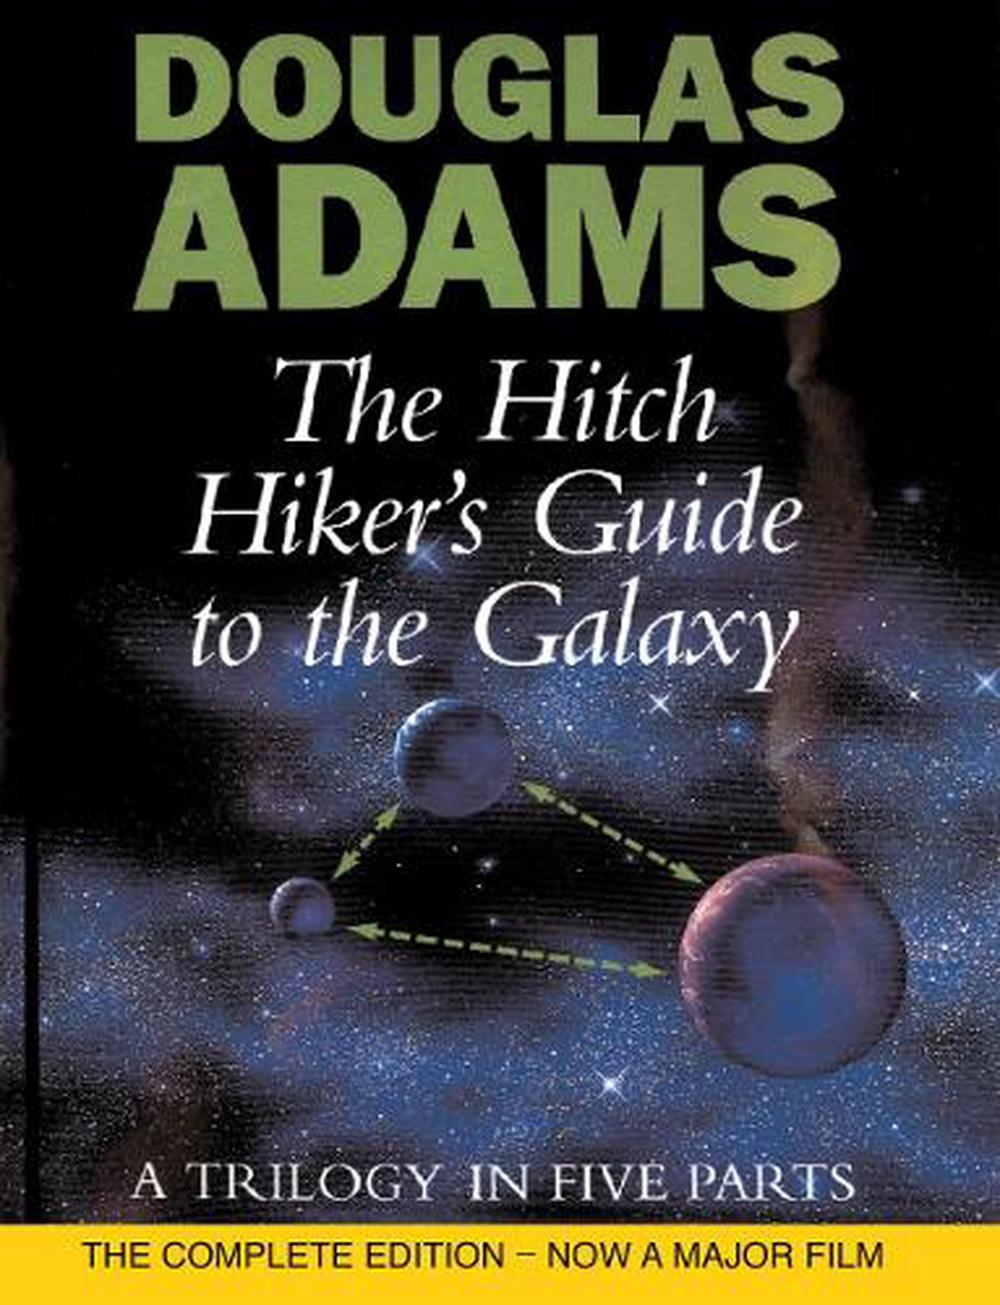 9780434003488　online　Adams,　The　Buy　Hitch　The　Galaxy　The　Douglas　Hiker's　Guide　Nile　To　by　Hardcover,　at